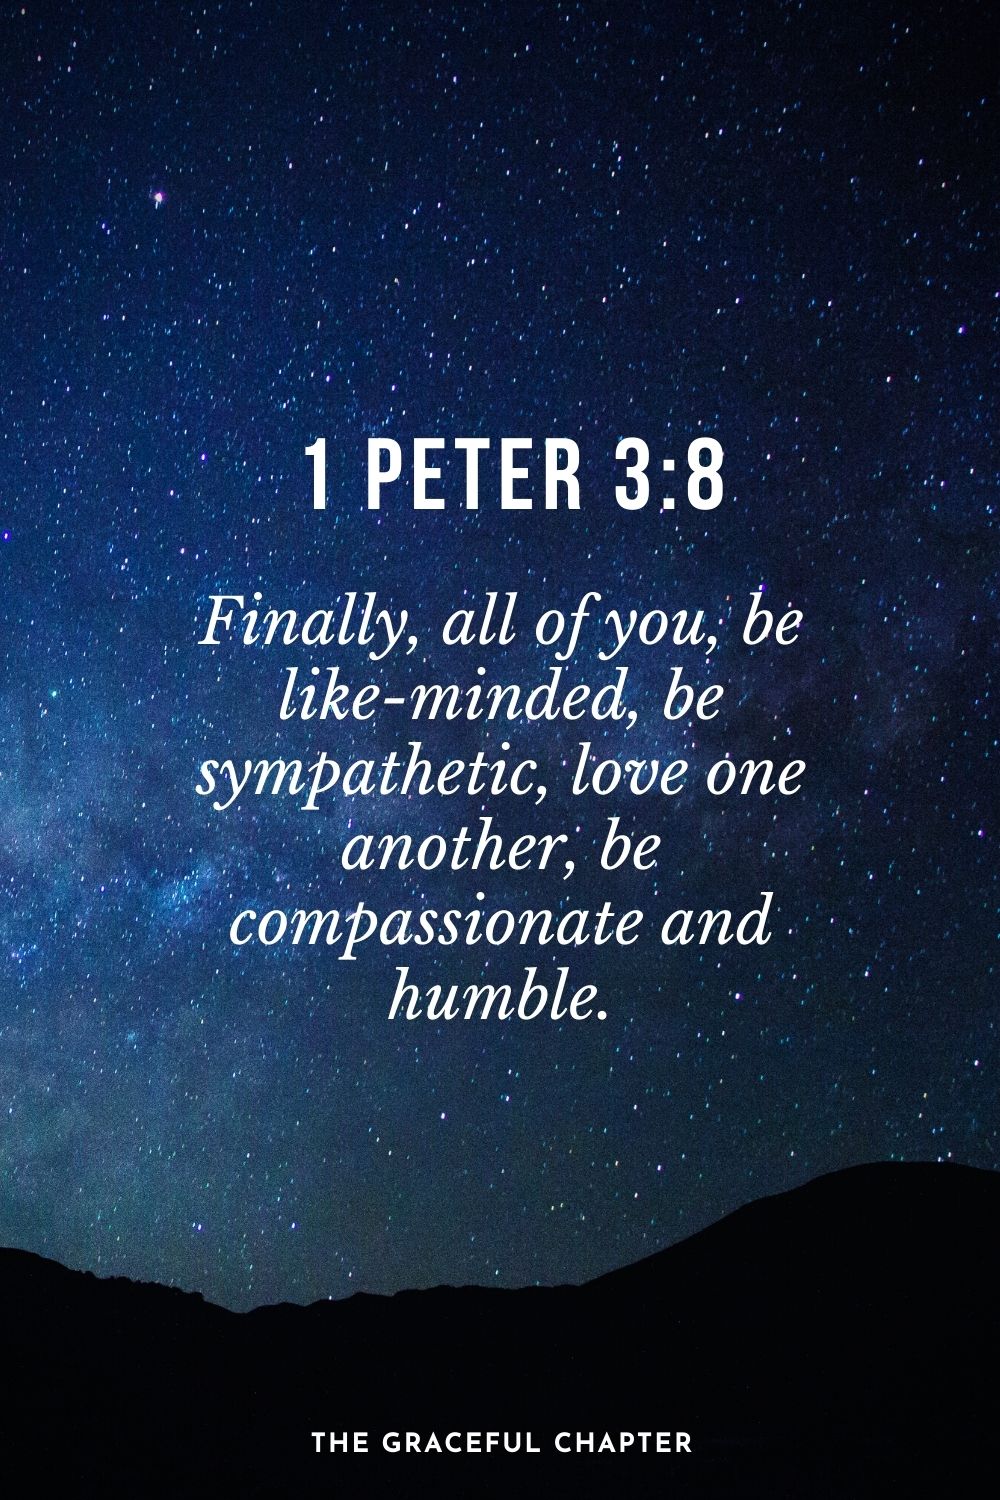 Finally, all of you, be like-minded, be sympathetic, love one another, be compassionate and humble. 1 Peter 3:8